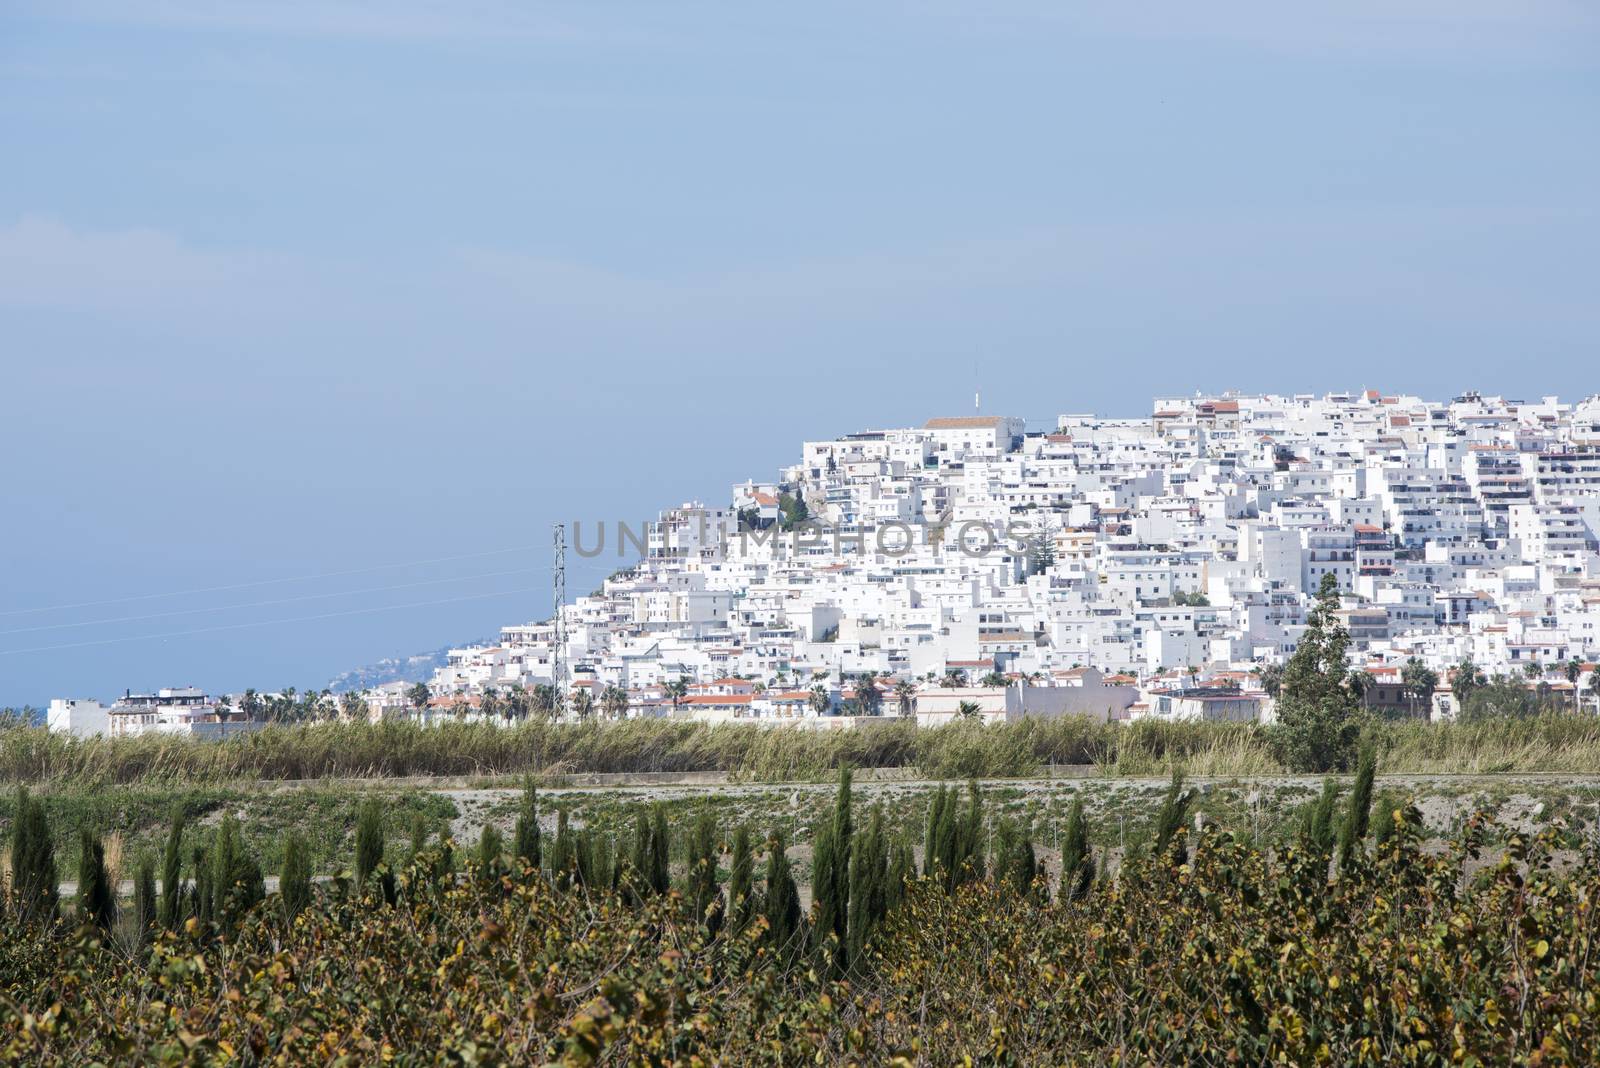 white typical spanish houses on a hill in andalusia near the city of malaga at the coast of spain